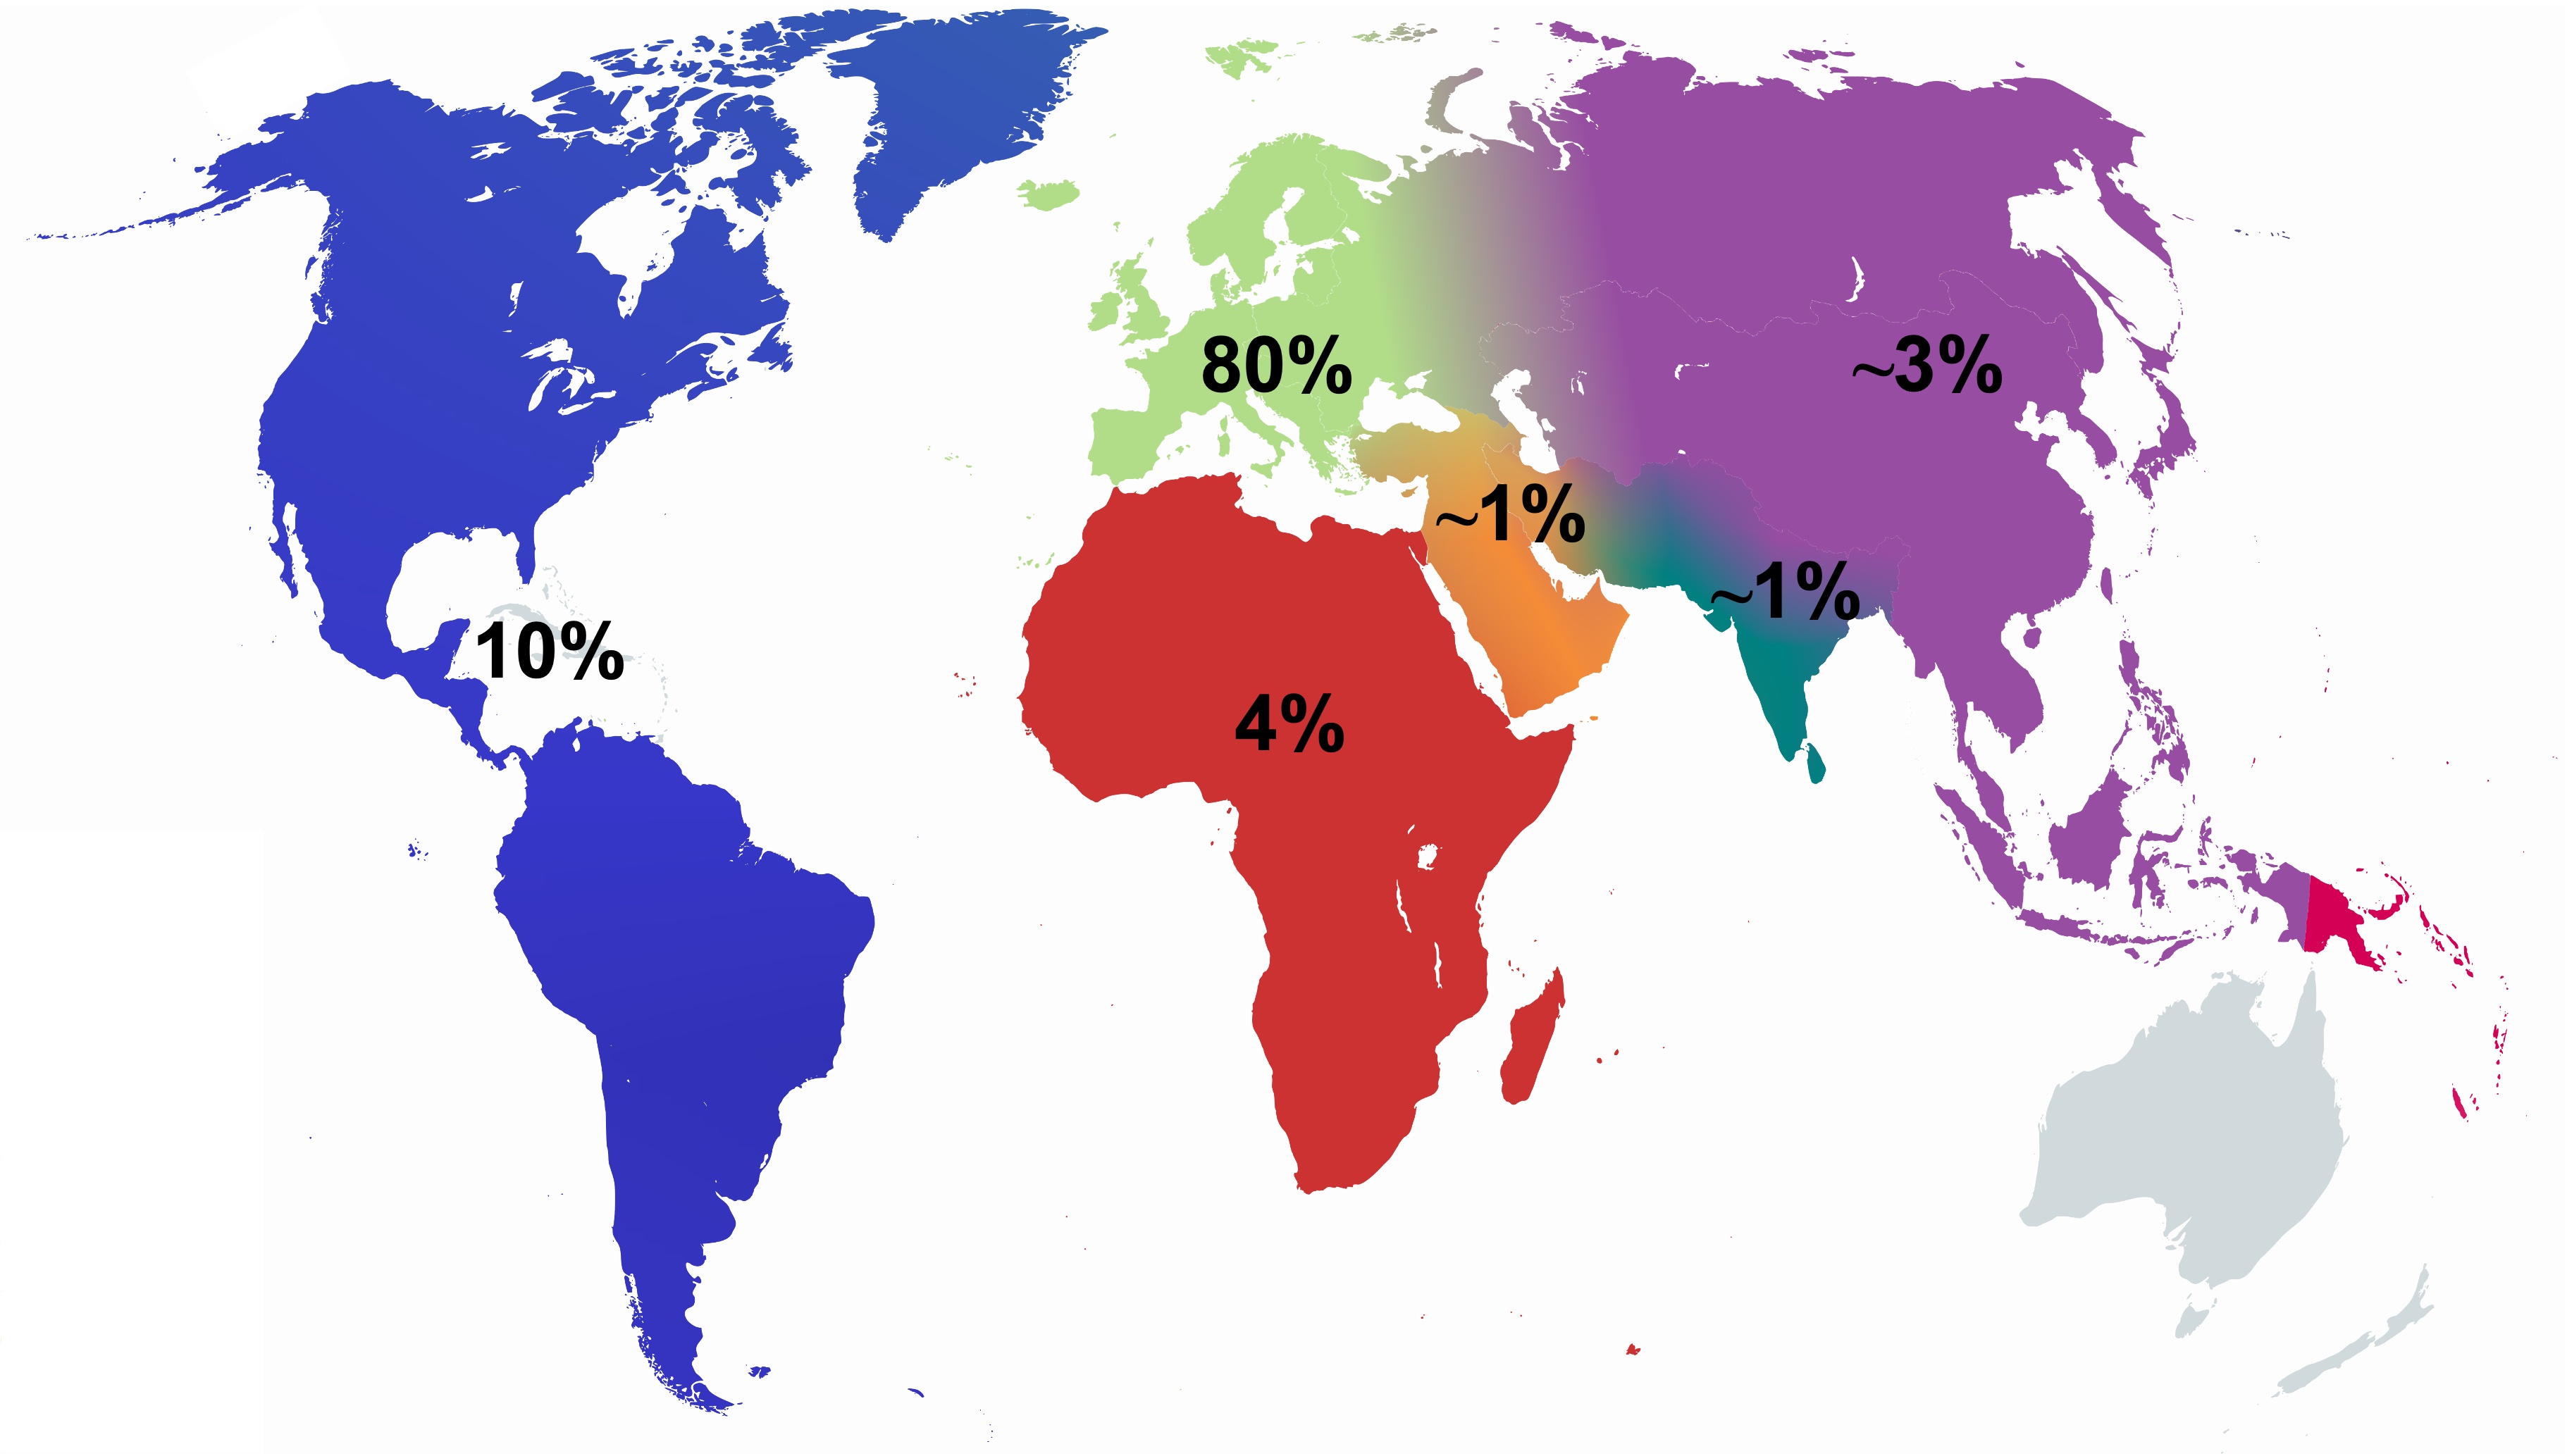 world_map_recolor_genetic_ancestry_20220415[43]